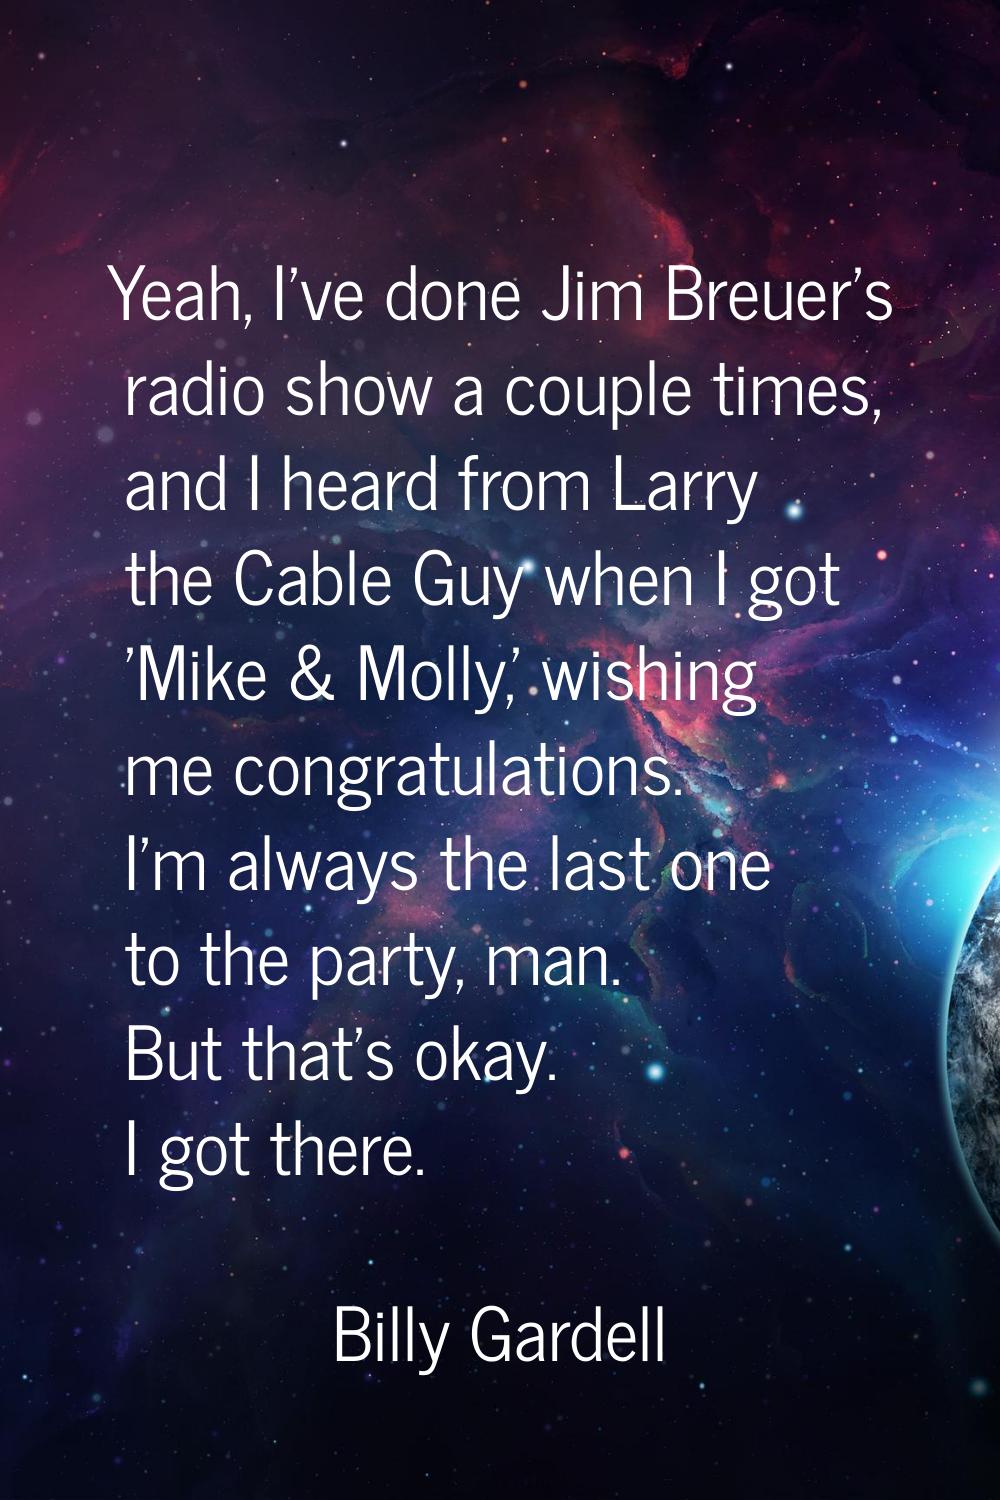 Yeah, I've done Jim Breuer's radio show a couple times, and I heard from Larry the Cable Guy when I